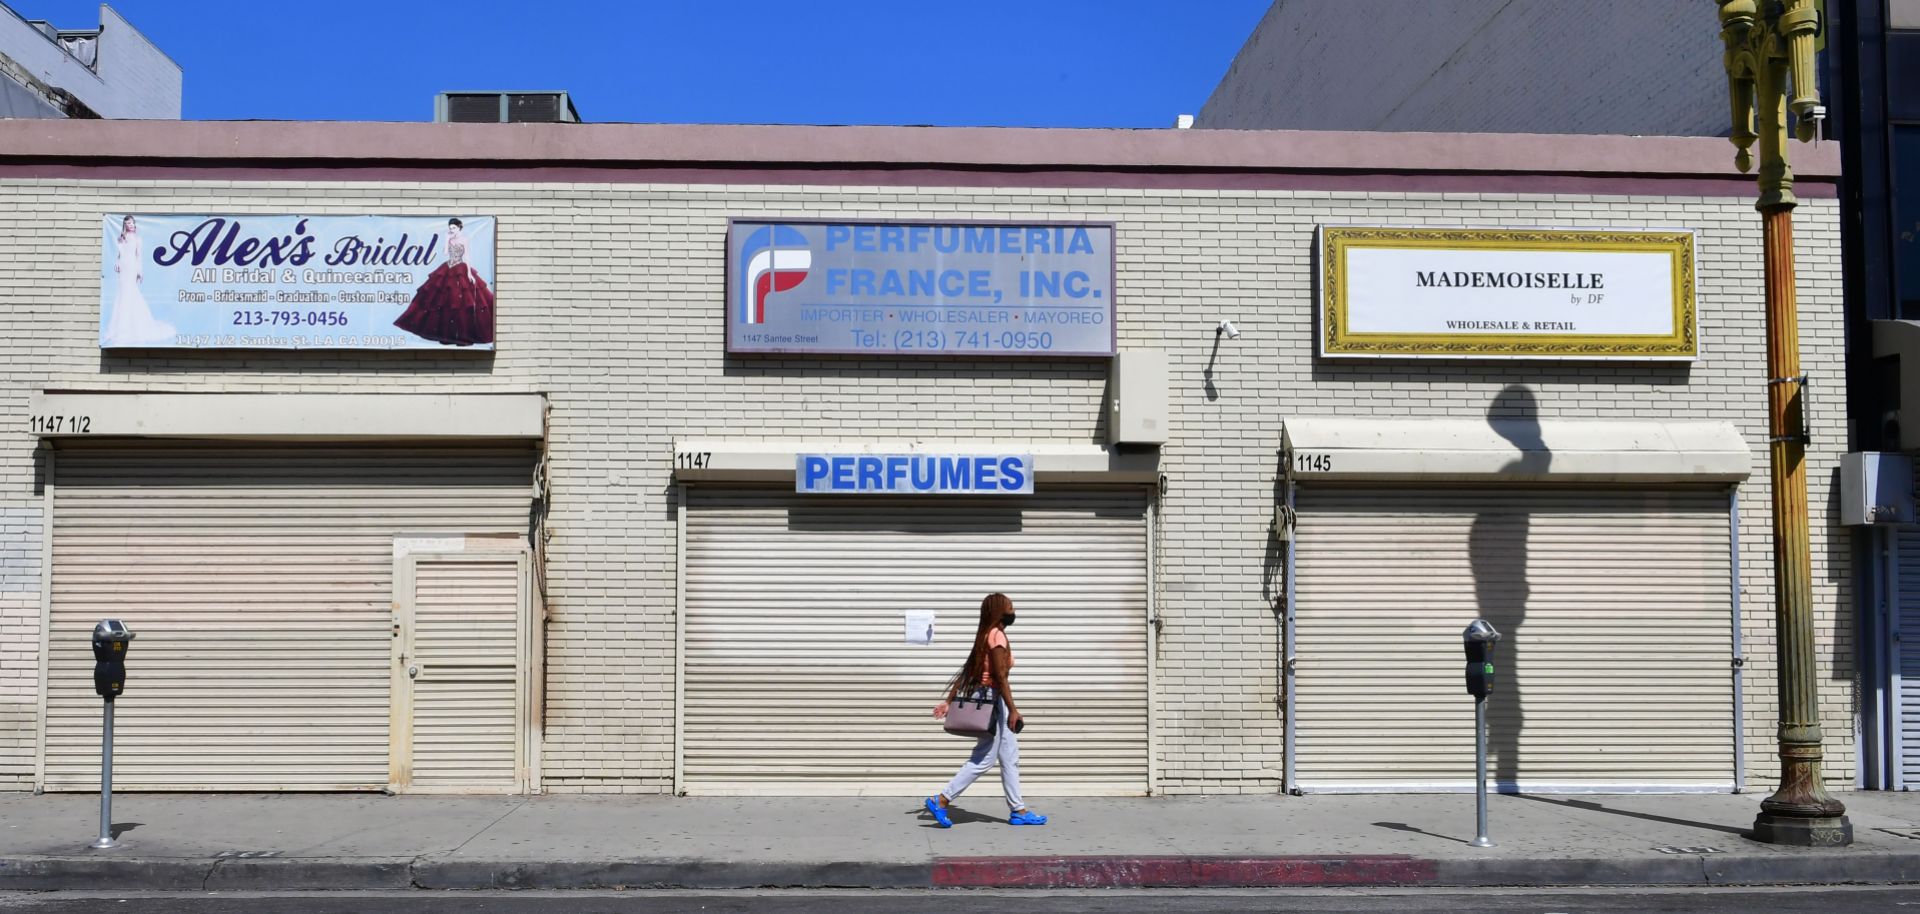 A woman walks past closed shopfronts in what would be a normally busy fashion district in Los Angeles, California, on May 4, 2020. 